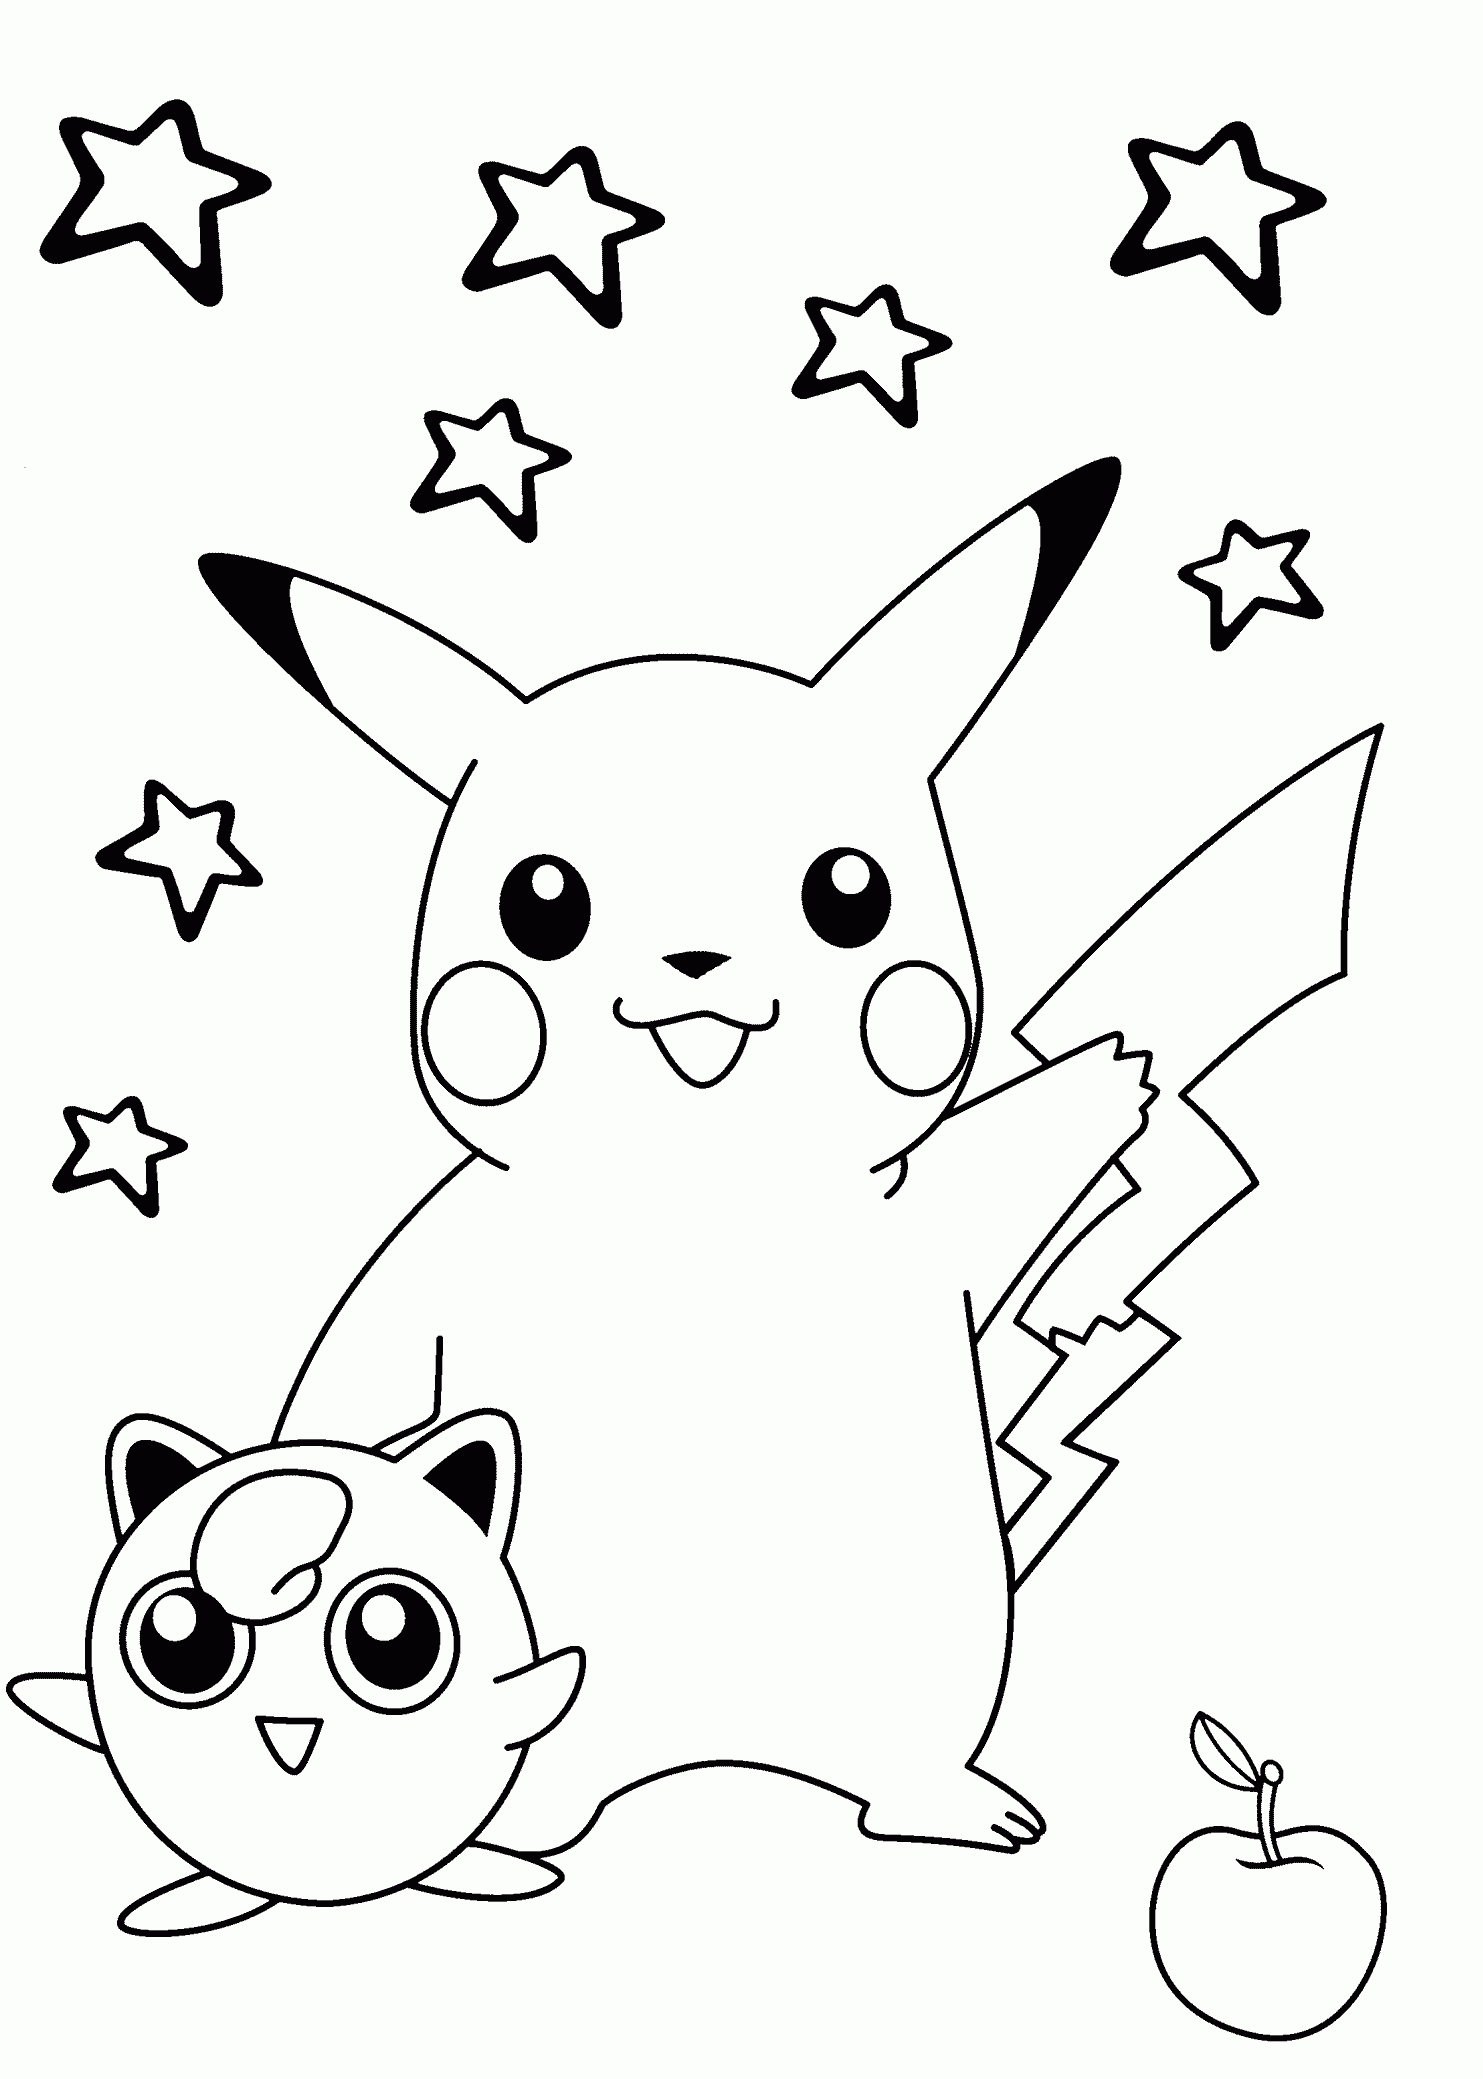 Smiling Pokemon Coloring Pages For Kids, Printable Free | Scanncut - Free Printable Coloring Pages Pokemon Black White